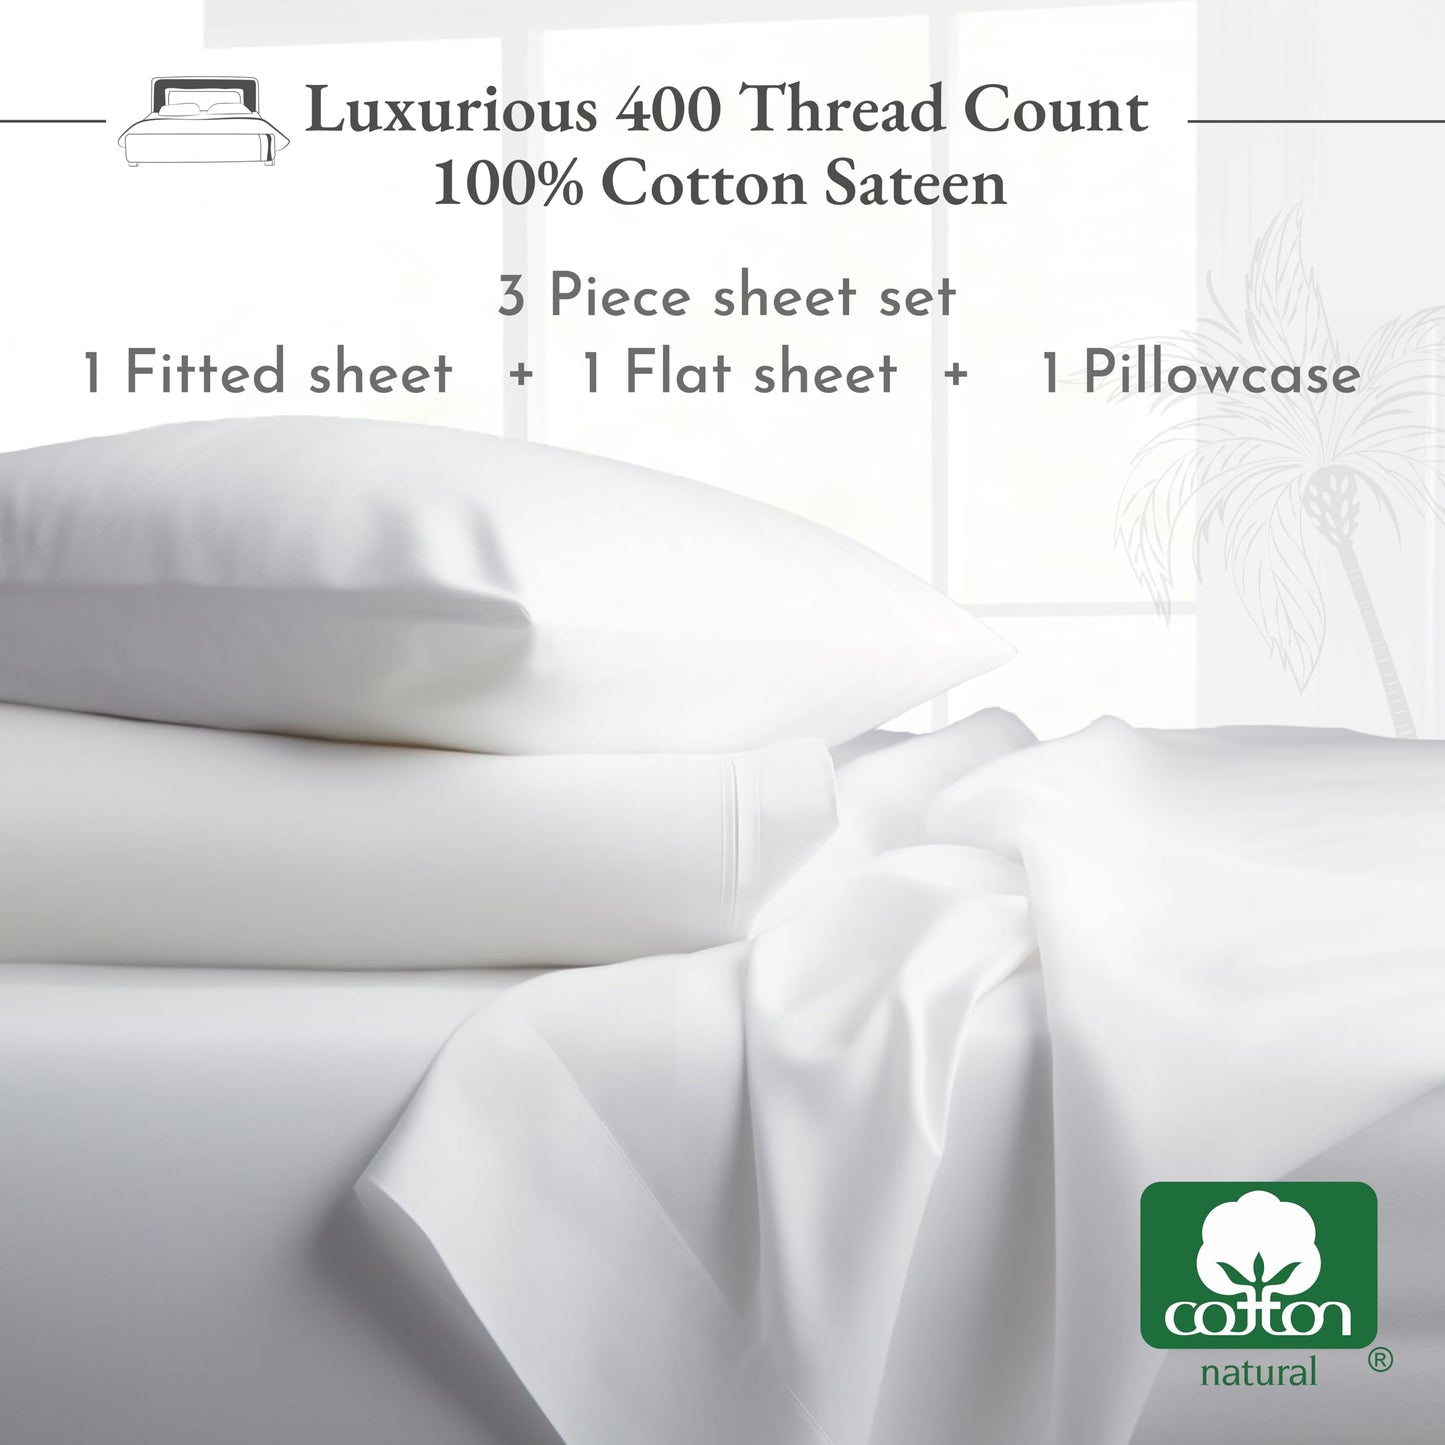 California Design Den Twin Sheets Set, Natural 100% Cotton Sheets, Soft Luxury 400 Thread Count Sateen Cooling Sheets, 3 Pc Dorm Rooms & Adults, Twin Bed Sheets (Bright White Sheets)